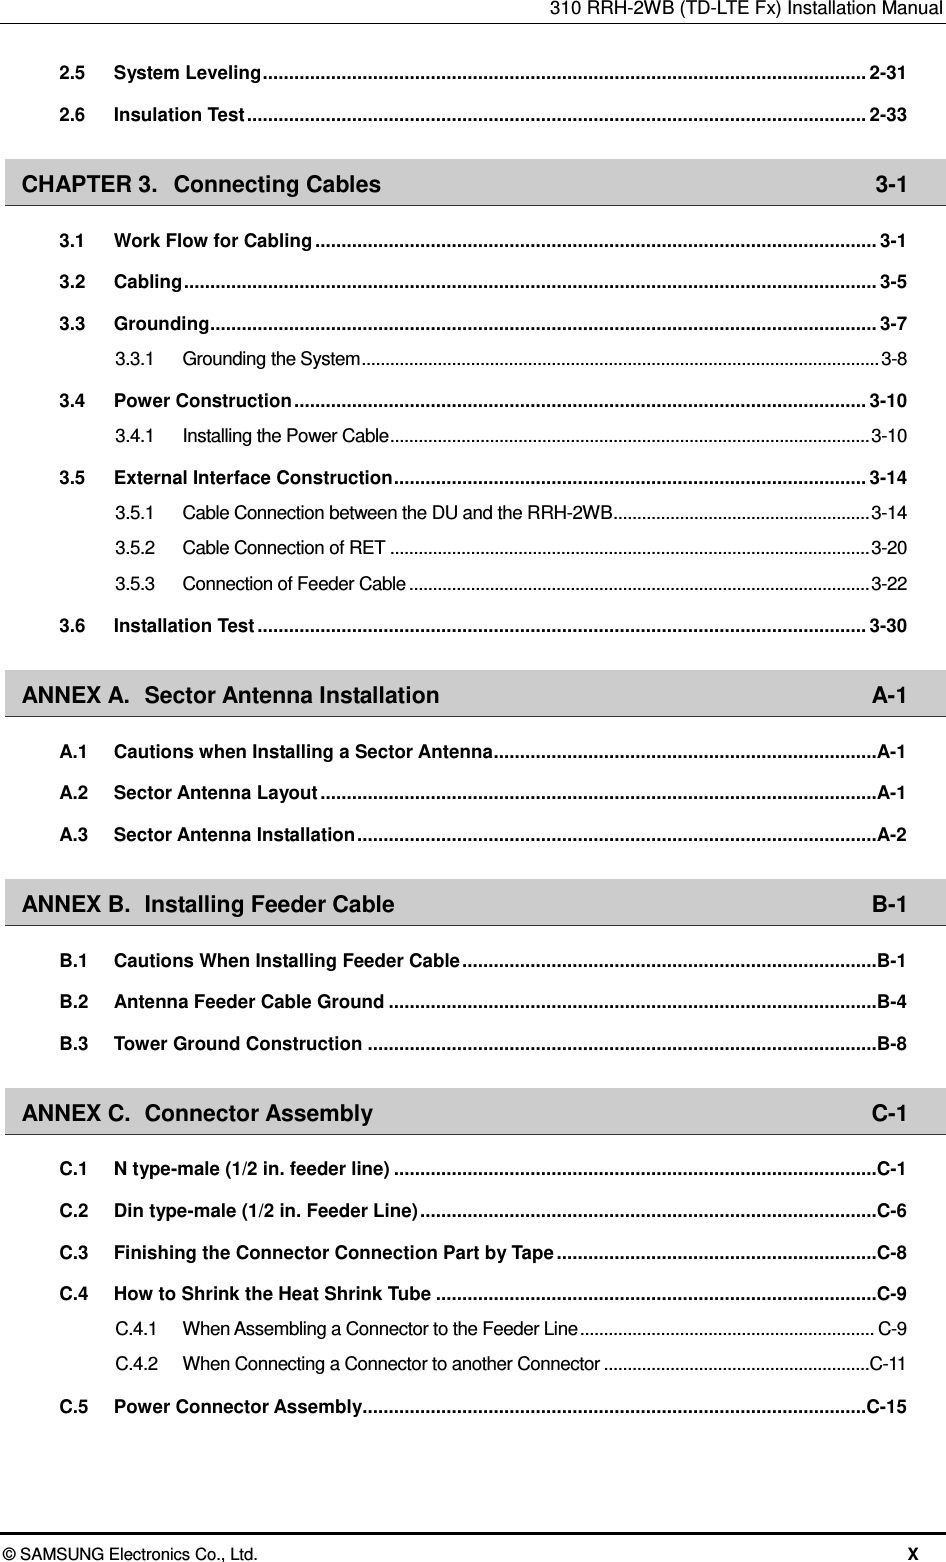 310 RRH-2WB (TD-LTE Fx) Installation Manual  © SAMSUNG Electronics Co., Ltd.  X 2.5 System Leveling ................................................................................................................... 2-31 2.6 Insulation Test ...................................................................................................................... 2-33 CHAPTER 3. Connecting Cables  3-1 3.1 Work Flow for Cabling ........................................................................................................... 3-1 3.2 Cabling .................................................................................................................................... 3-5 3.3 Grounding ............................................................................................................................... 3-7 3.3.1 Grounding the System ............................................................................................................. 3-8 3.4 Power Construction ............................................................................................................. 3-10 3.4.1 Installing the Power Cable ..................................................................................................... 3-10 3.5 External Interface Construction .......................................................................................... 3-14 3.5.1 Cable Connection between the DU and the RRH-2WB ...................................................... 3-14 3.5.2 Cable Connection of RET ..................................................................................................... 3-20 3.5.3 Connection of Feeder Cable ................................................................................................. 3-22 3.6 Installation Test .................................................................................................................... 3-30 ANNEX A. Sector Antenna Installation  A-1 A.1 Cautions when Installing a Sector Antenna .........................................................................A-1 A.2 Sector Antenna Layout ..........................................................................................................A-1 A.3 Sector Antenna Installation ...................................................................................................A-2 ANNEX B. Installing Feeder Cable  B-1 B.1 Cautions When Installing Feeder Cable ...............................................................................B-1 B.2 Antenna Feeder Cable Ground .............................................................................................B-4 B.3 Tower Ground Construction .................................................................................................B-8 ANNEX C. Connector Assembly  C-1 C.1 N type-male (1/2 in. feeder line) ............................................................................................C-1 C.2 Din type-male (1/2 in. Feeder Line) .......................................................................................C-6 C.3 Finishing the Connector Connection Part by Tape .............................................................C-8 C.4 How to Shrink the Heat Shrink Tube ....................................................................................C-9 C.4.1 When Assembling a Connector to the Feeder Line .............................................................. C-9 C.4.2 When Connecting a Connector to another Connector ........................................................C-11 C.5 Power Connector Assembly ................................................................................................C-15 